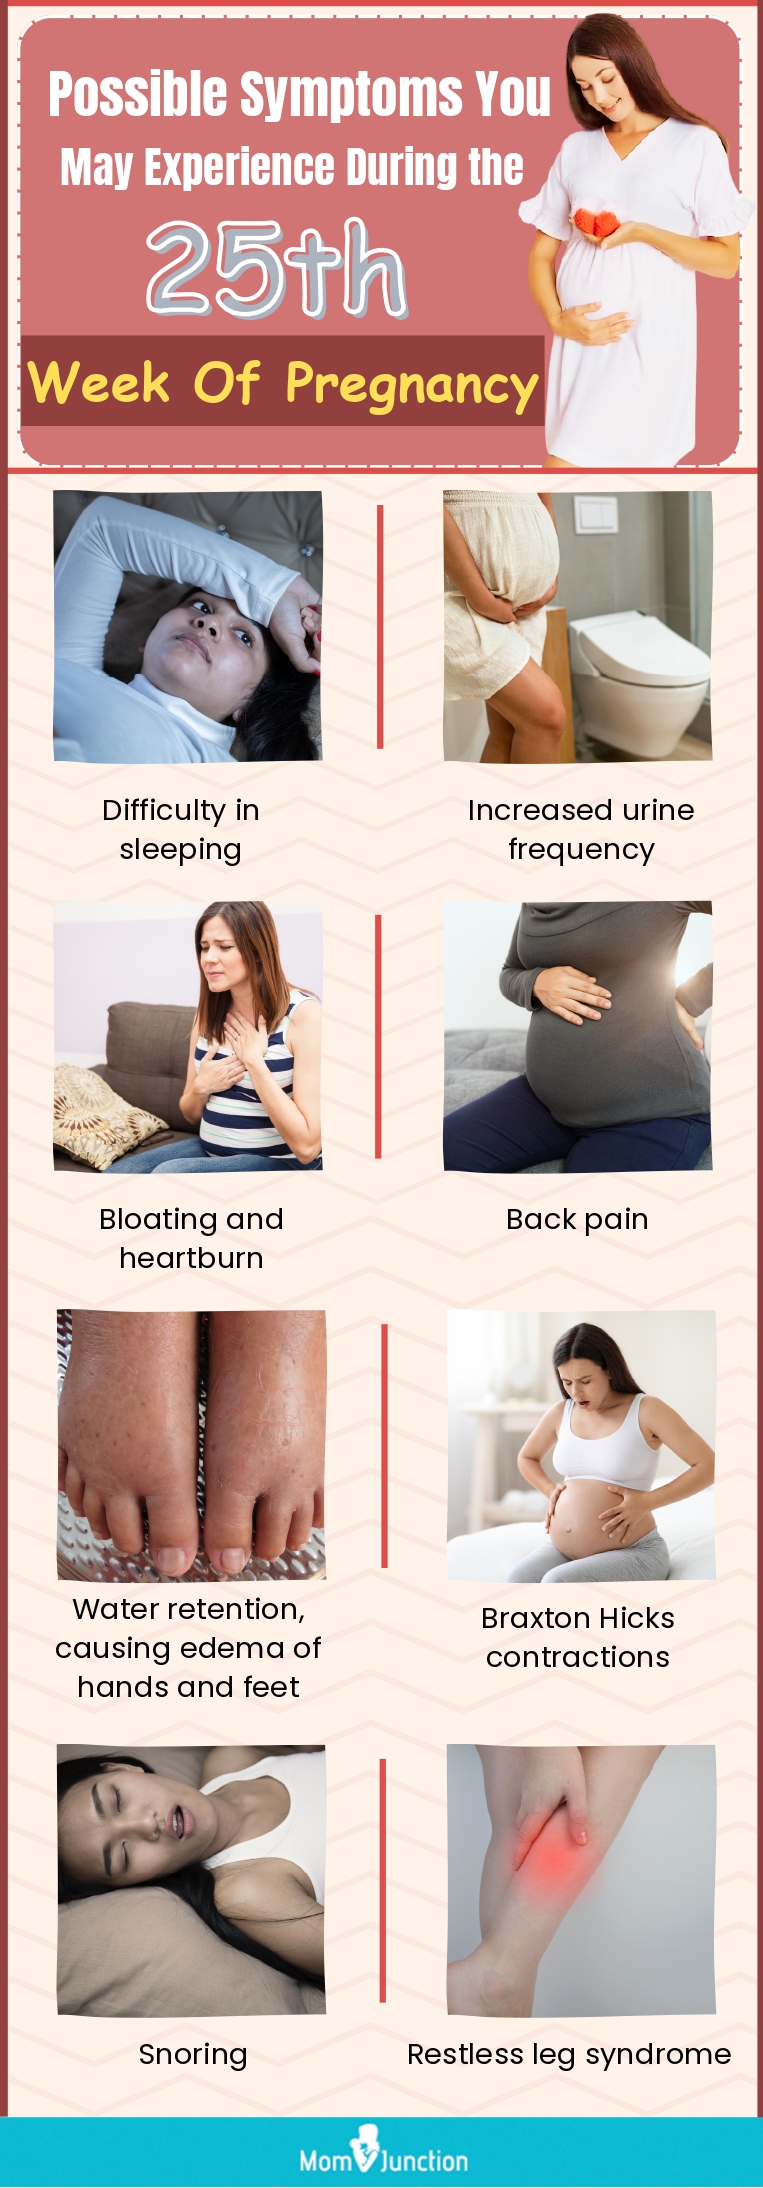 possible symptoms you may experience during the 25th week of pregnancy (infographic)